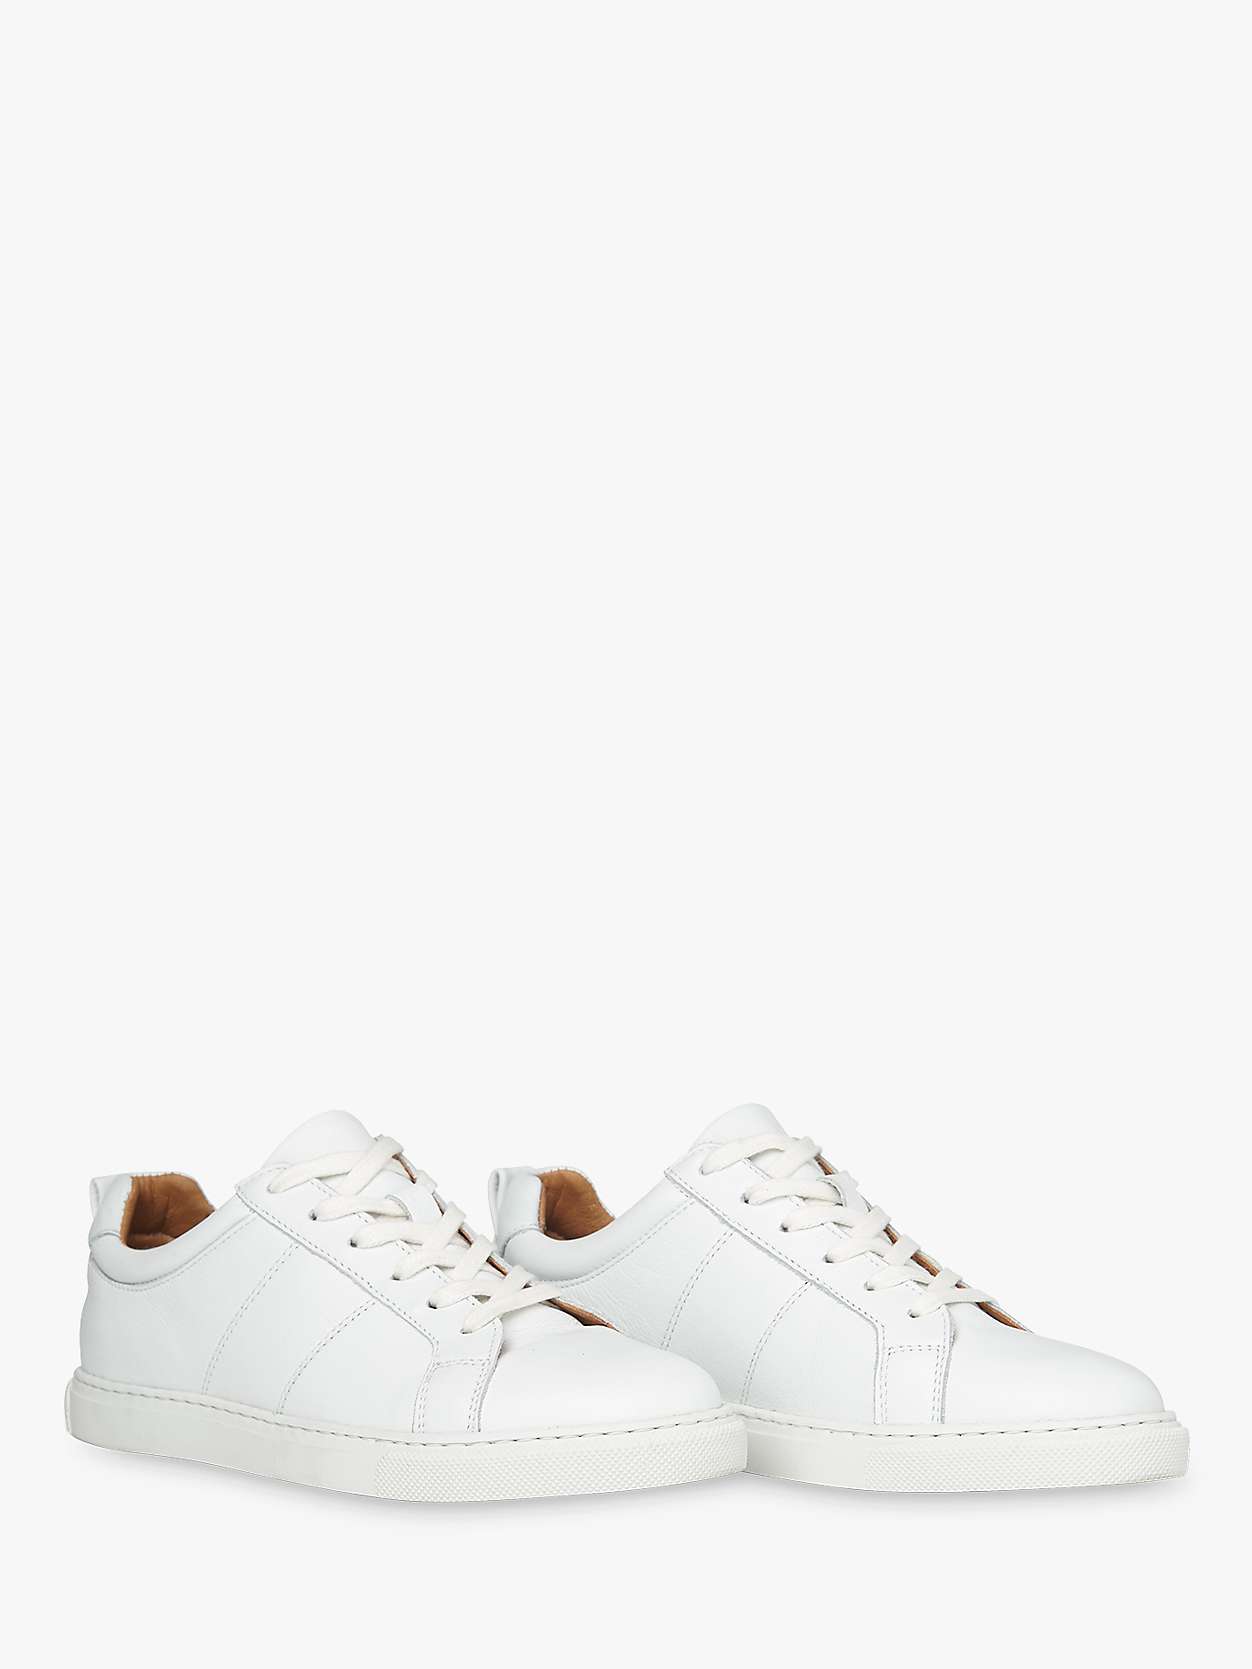 Buy Whistles Koki Leather Lace Up Trainers, White Online at johnlewis.com